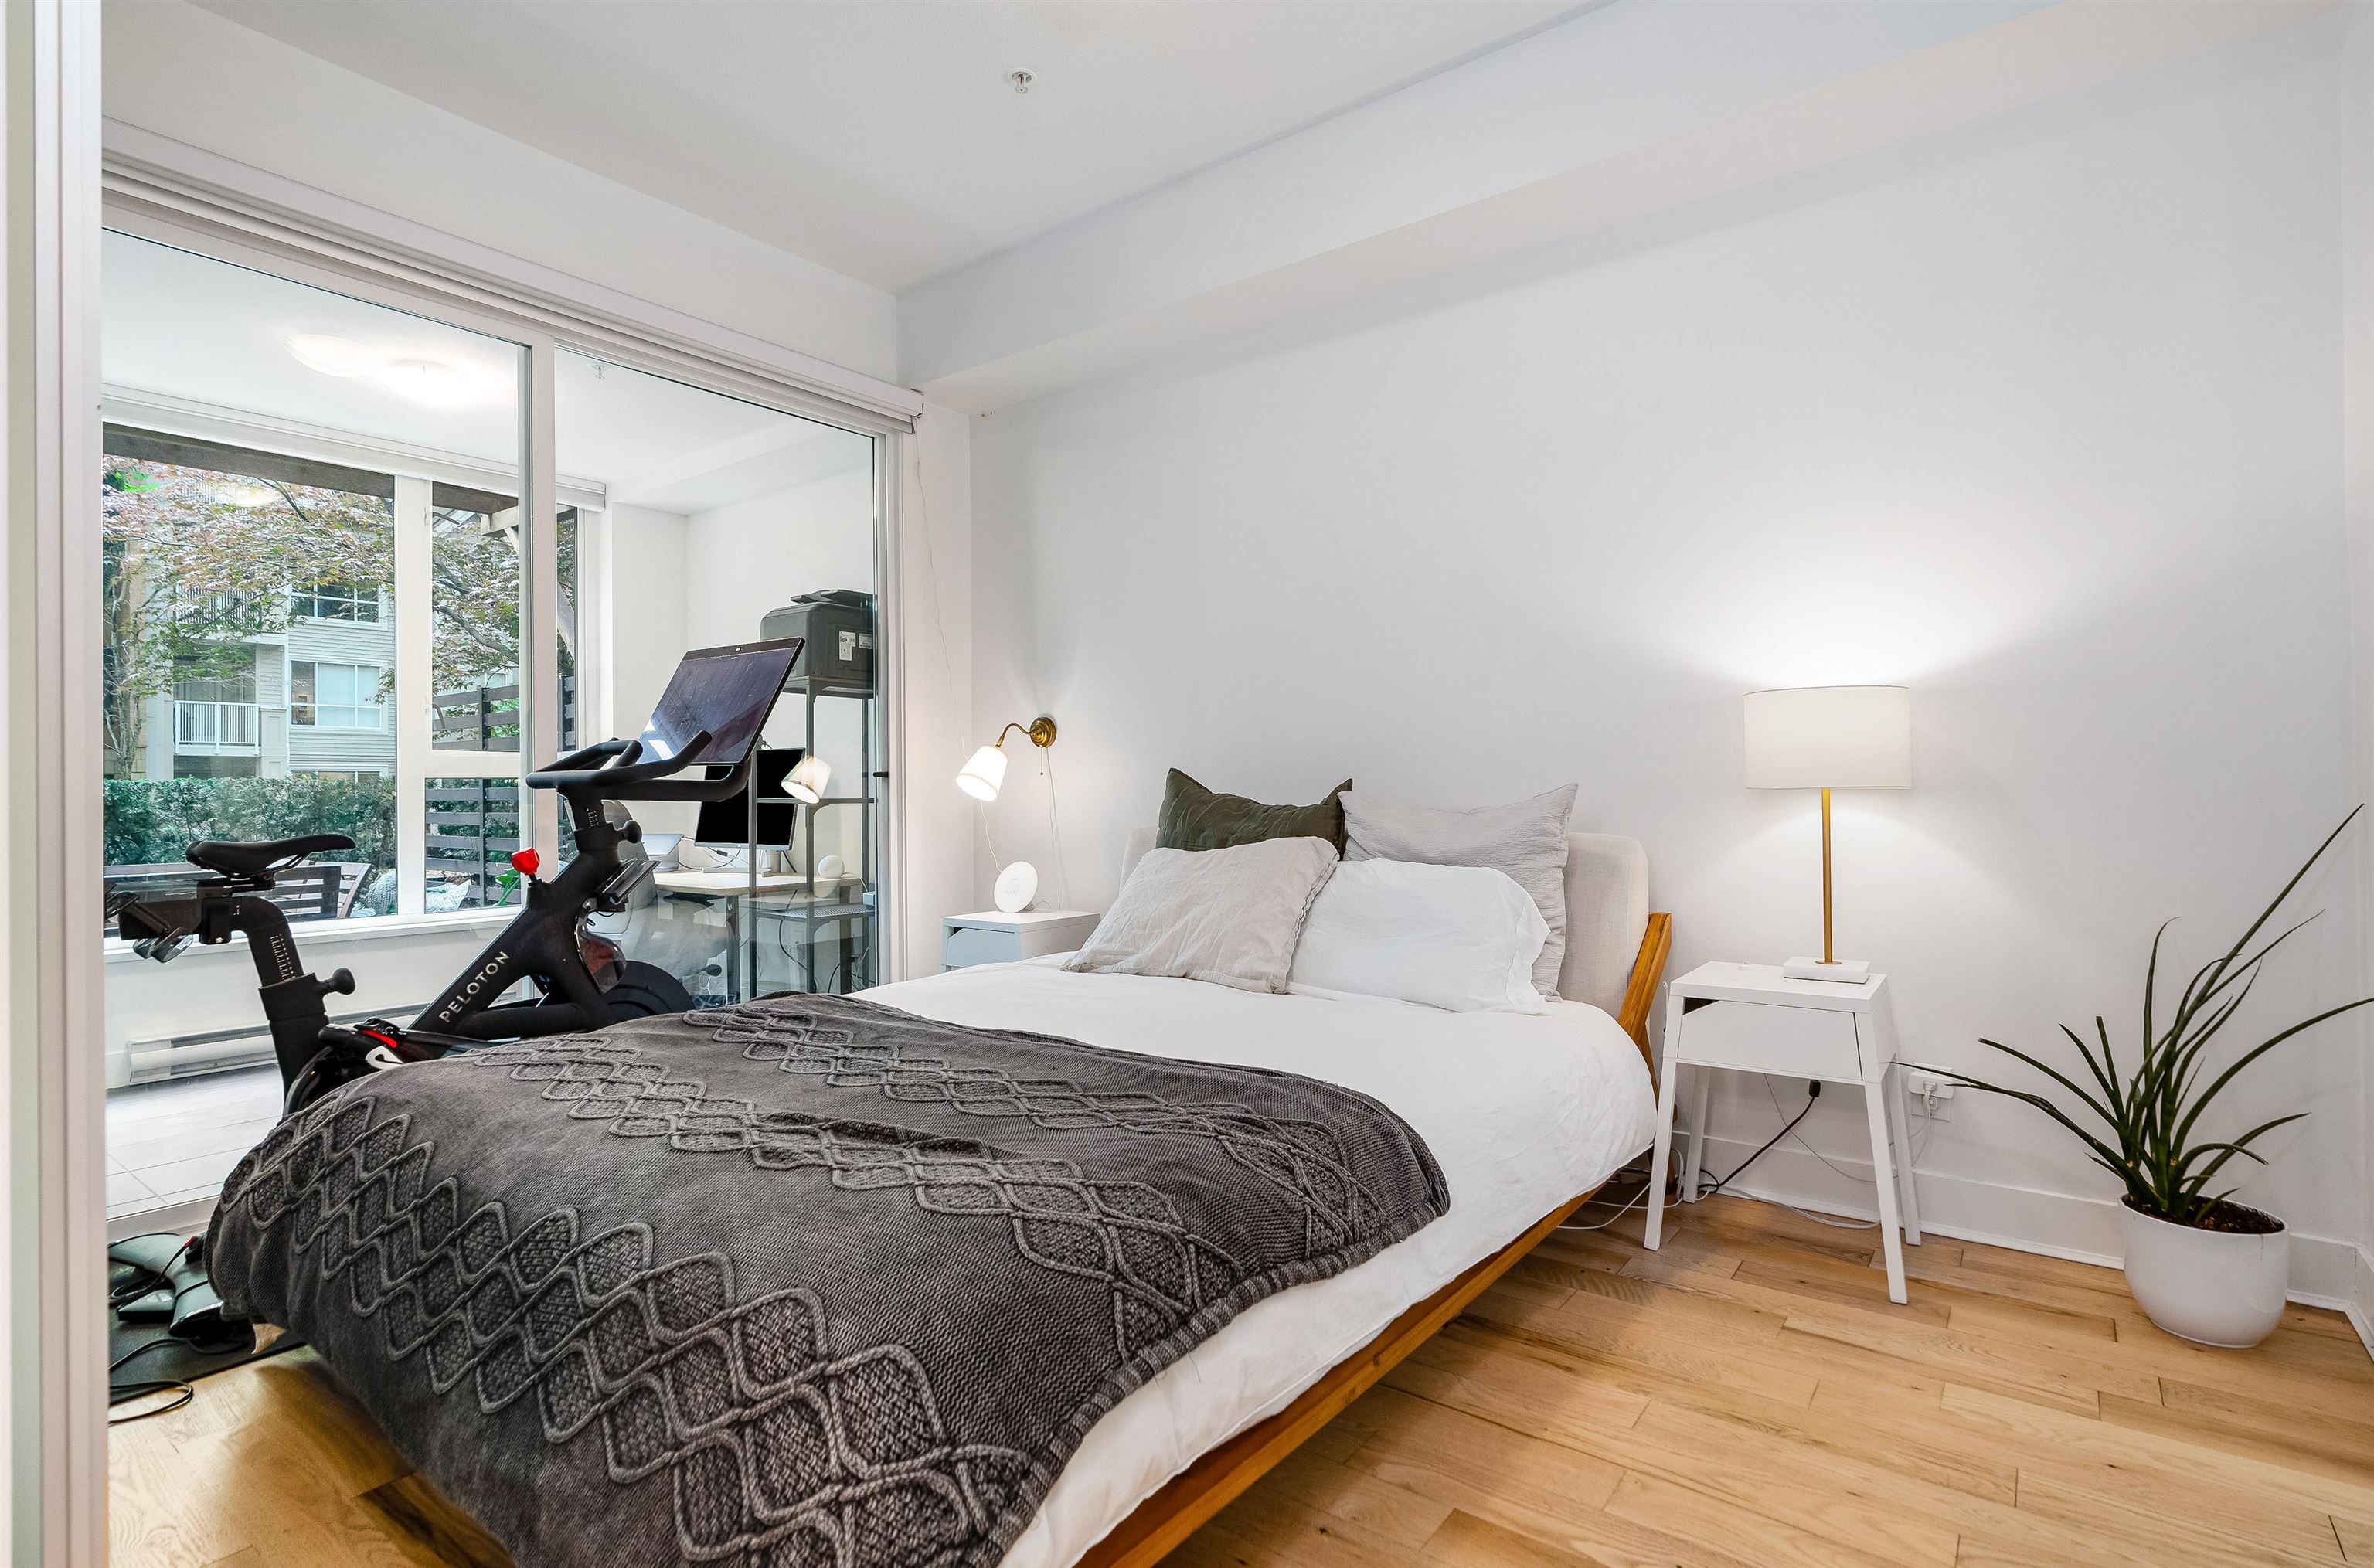 2020 W 12TH, Vancouver, British Columbia V6J 0C5, 1 Bedroom Bedrooms, ,1 BathroomBathrooms,Residential Attached,For Sale,W 12TH,R2738602